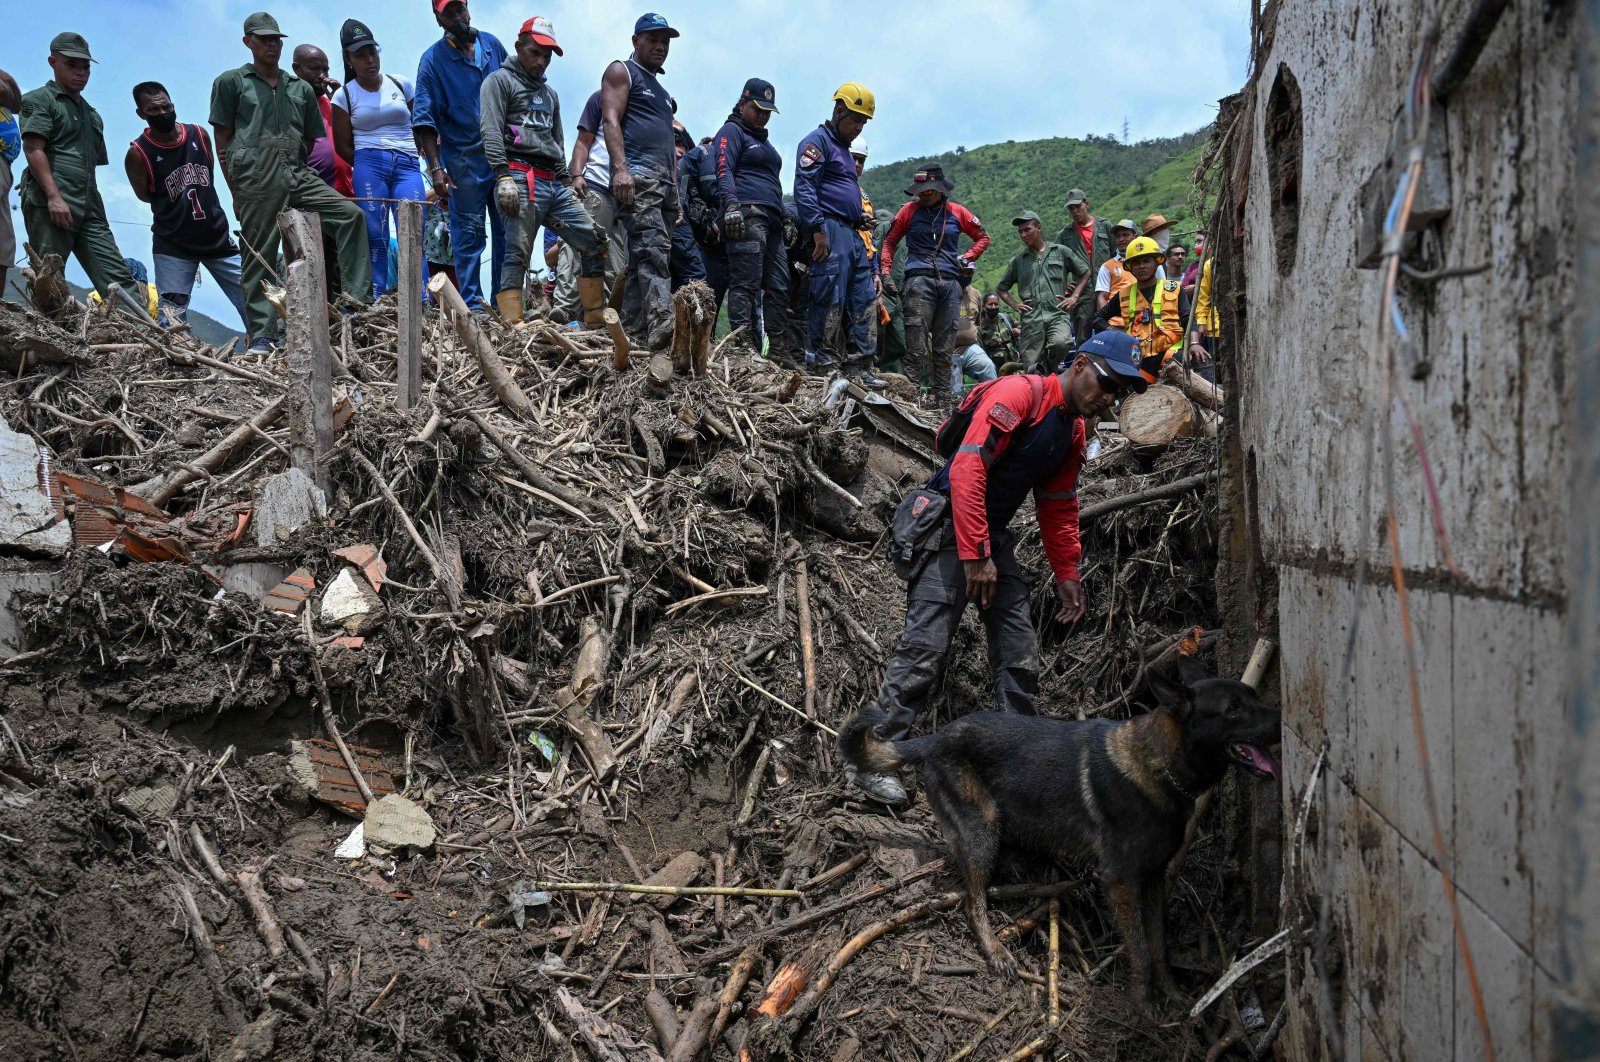 A Belgian shepherd dog, a member of the Aragua state firefighters, searches through the rubble of a destroyed house for victims, days after a devastating landslide, Las Tejerias, Aragua state, Venezuela, Oct. 13, 2022. (AFP Photo)